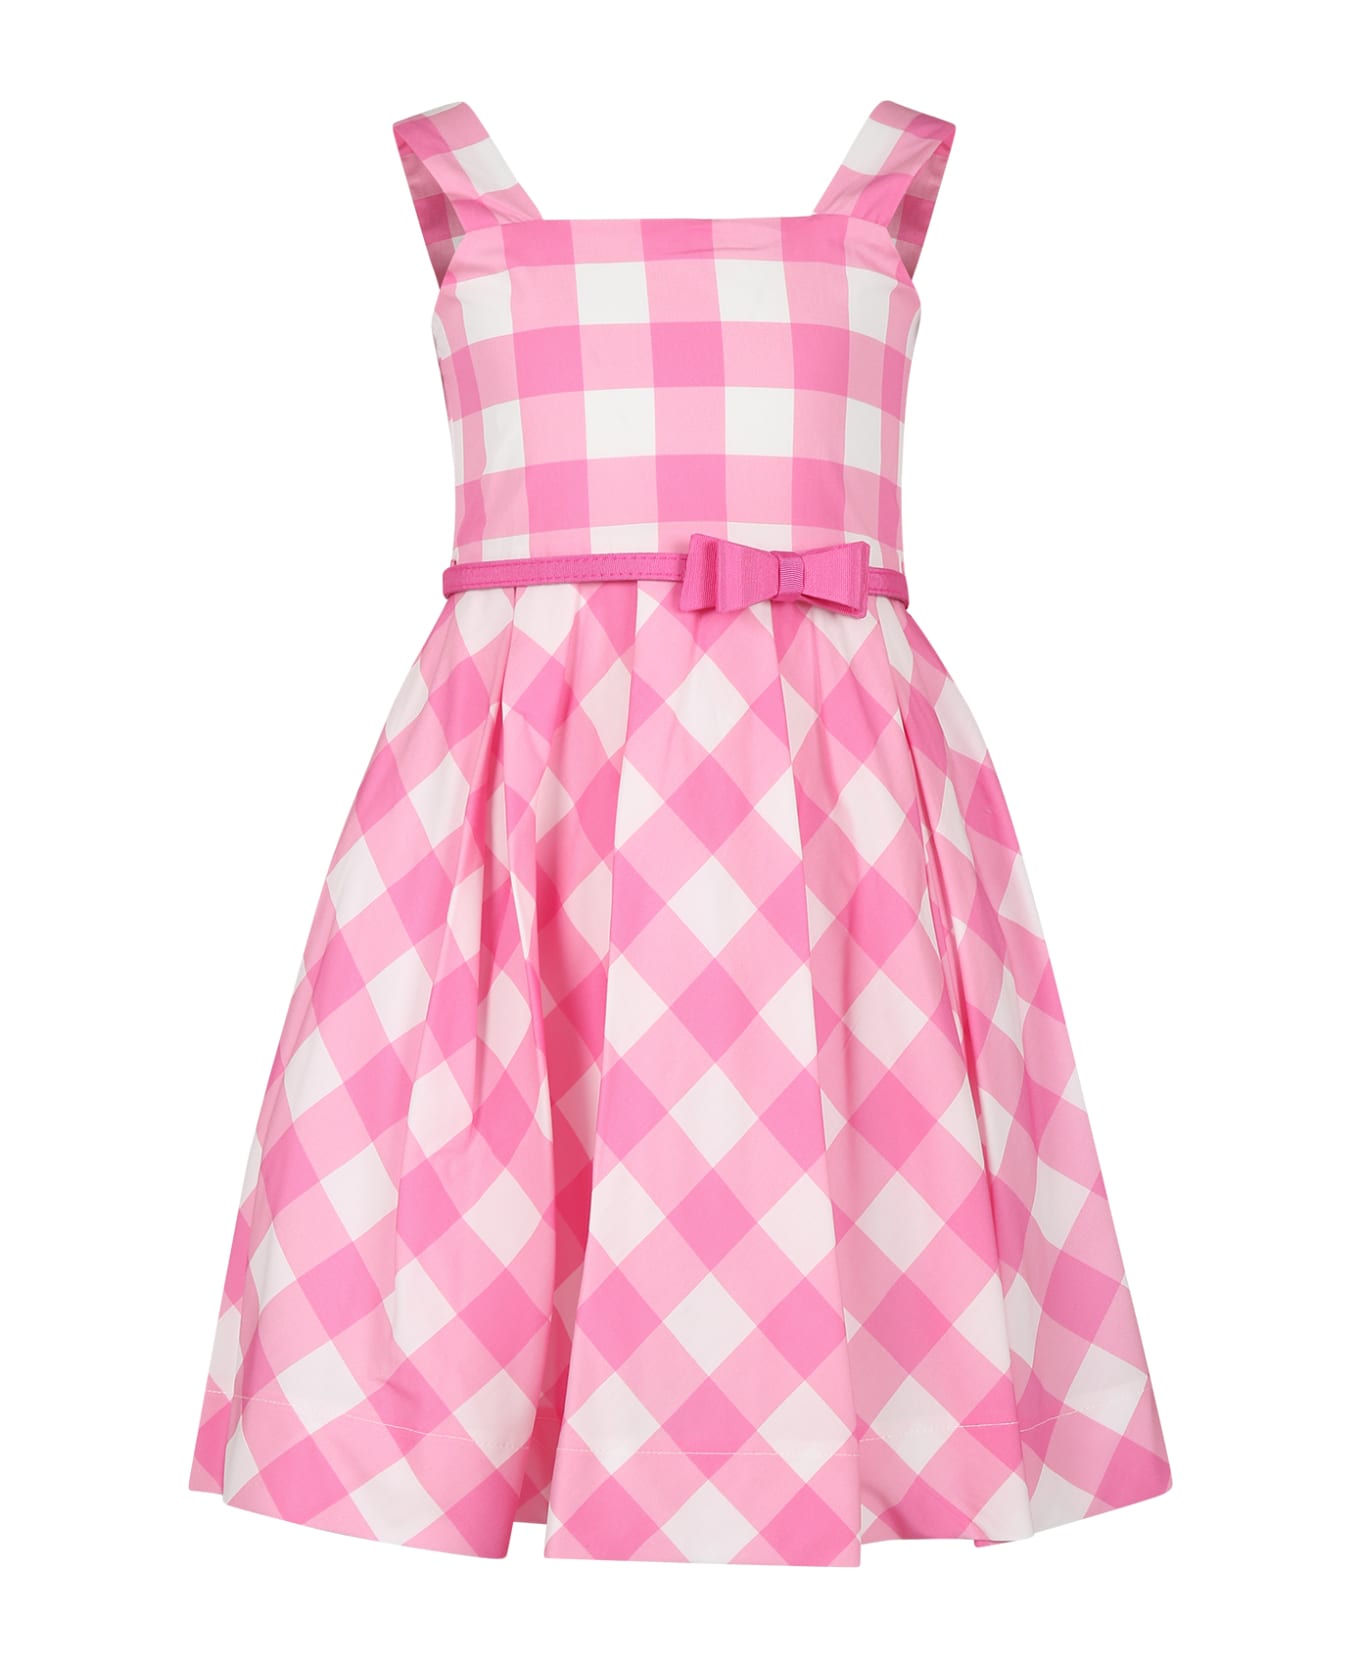 Monnalisa Pink Dress For Girl With Bow And Vichy Print - Multicolor ワンピース＆ドレス